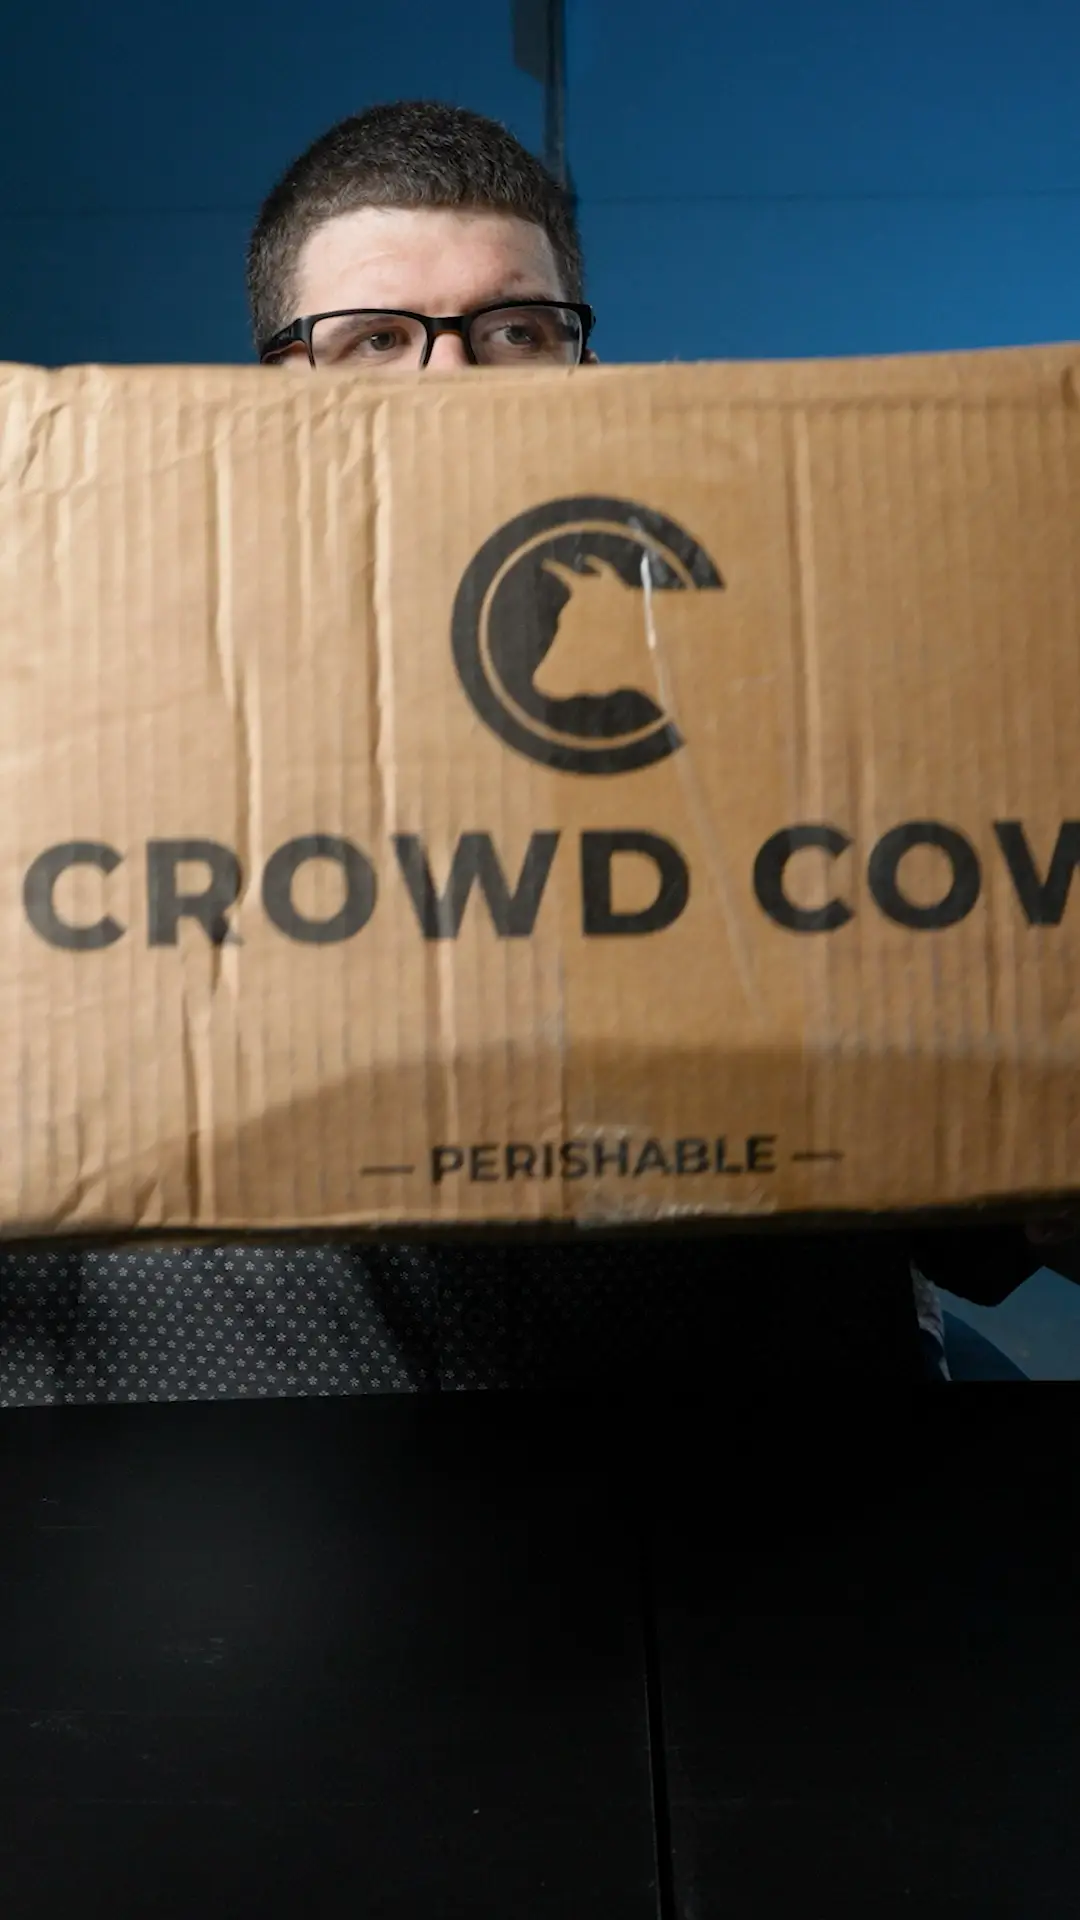 Crowd Cow Food Unboxing's images